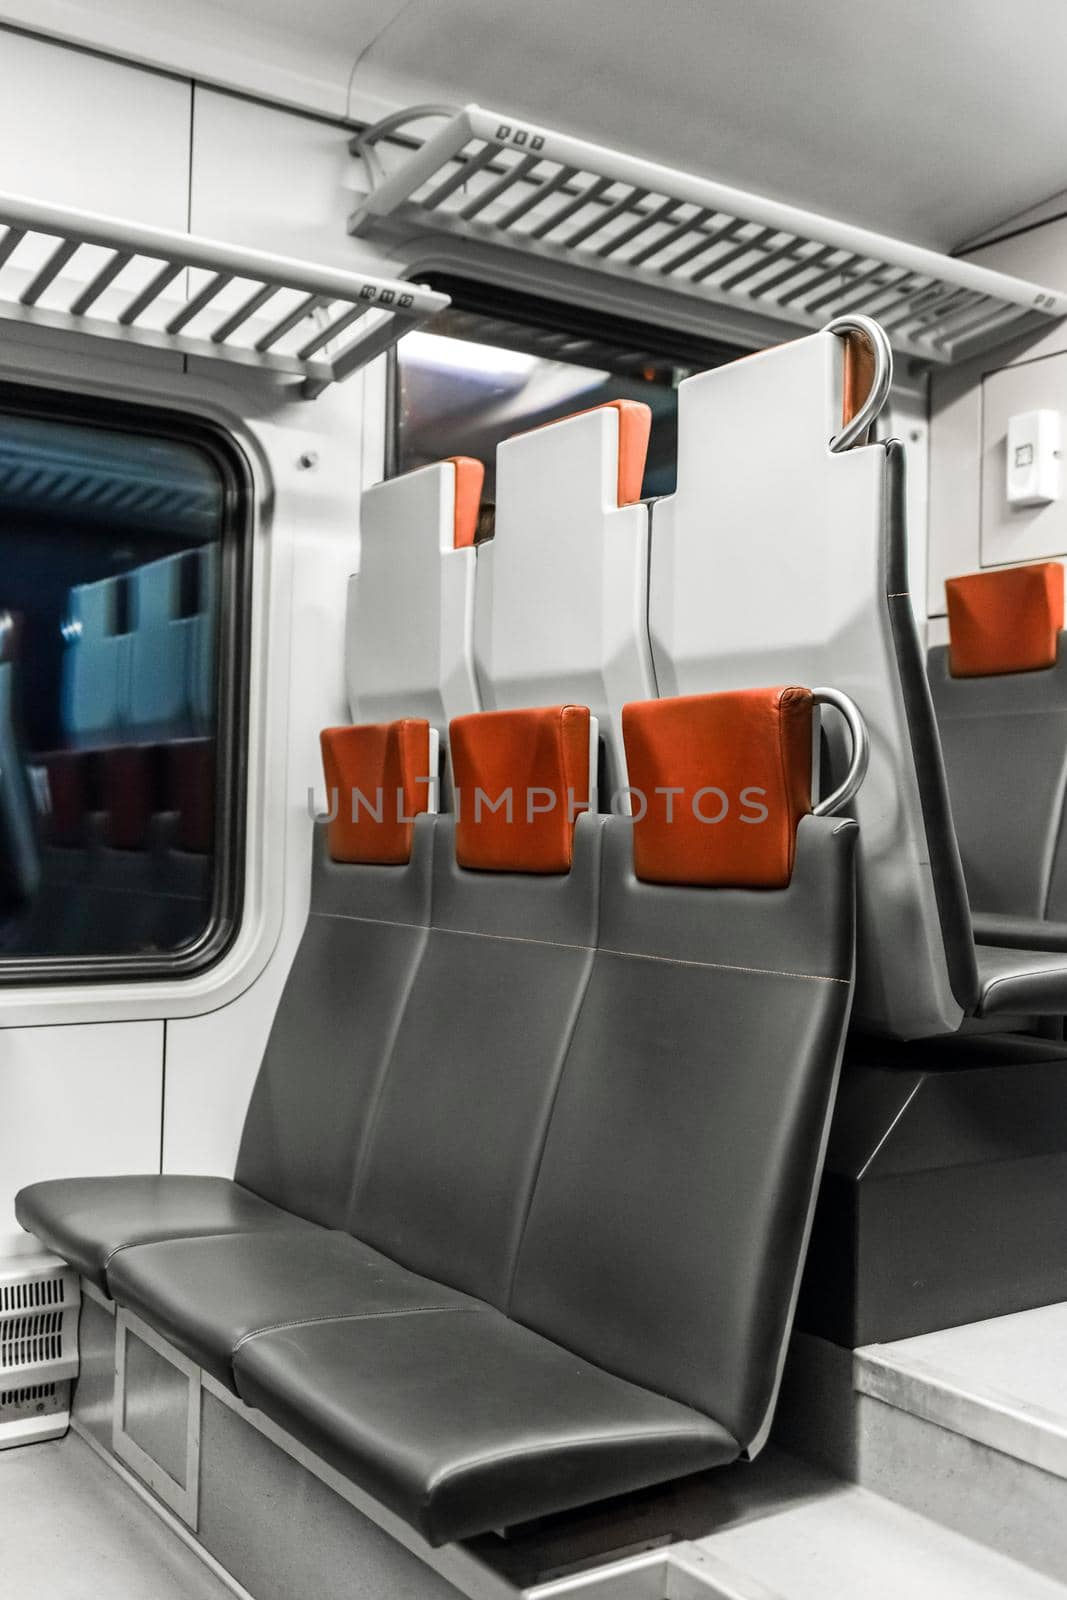 Electric train stadler modern interior with leather seats.